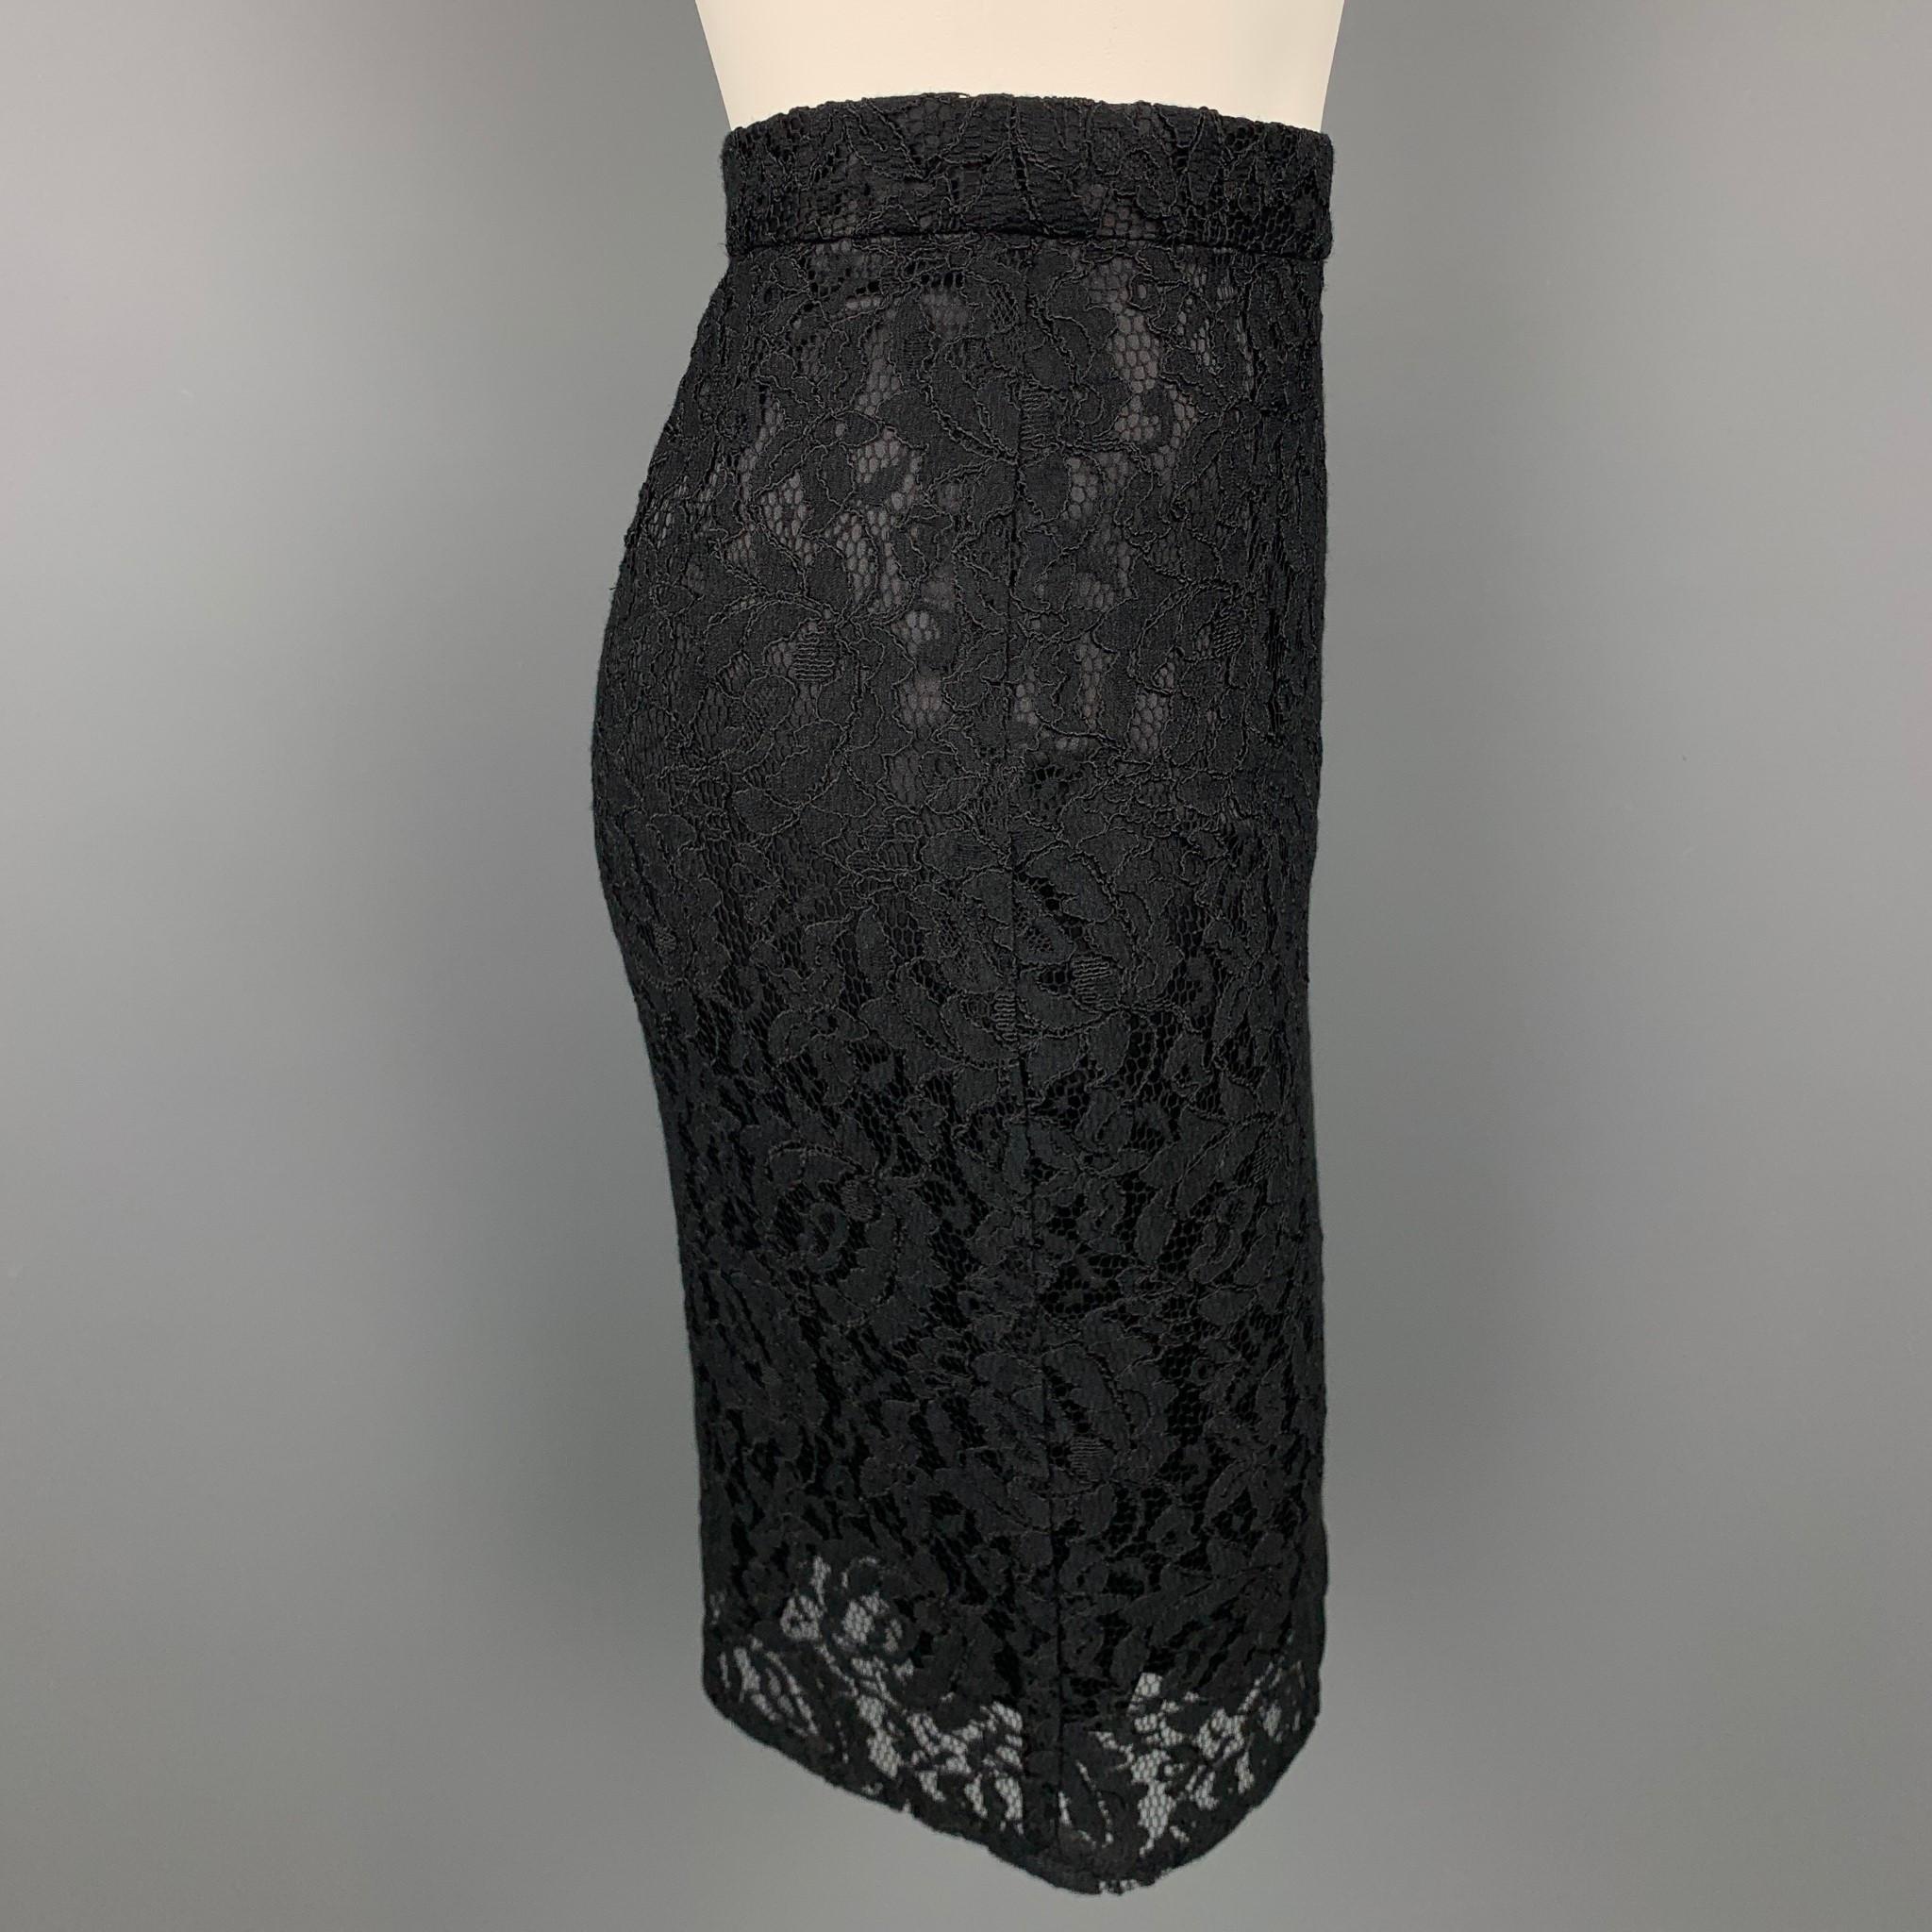 DOLCE & GABBANA skirt comes in a black lace material with a slip liner featuring a pencil style and a back zip up closure. Made in Italy.

Good Pre-Owned Condition.
Marked: No size marked

Measurements:

Waist: 28 in.
Hip: 36 in. 
Length: 21 in. 